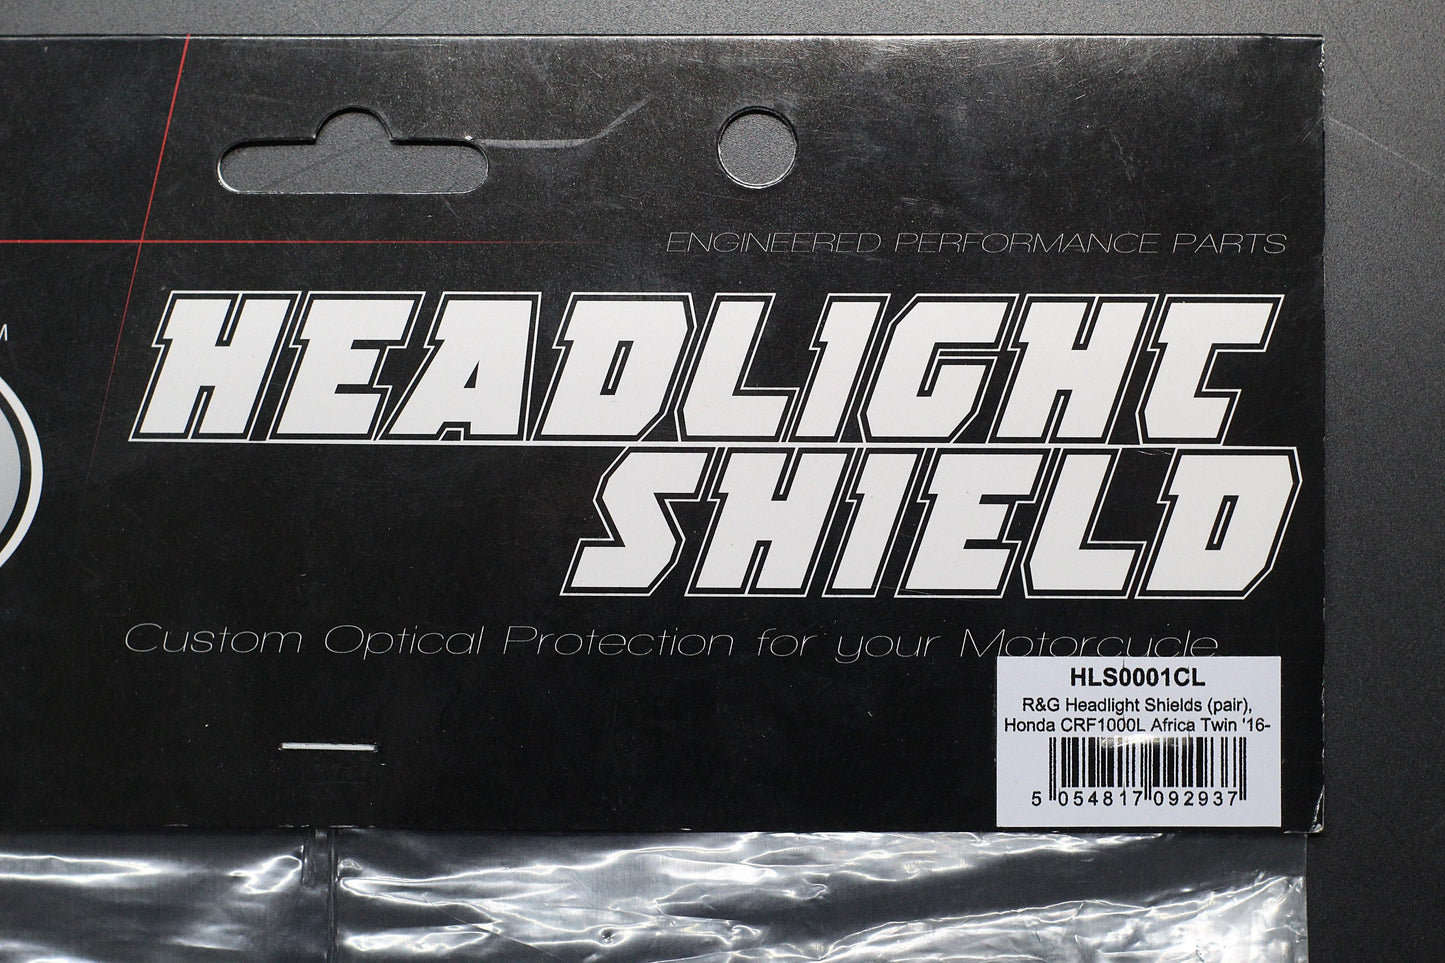 R&G Headlight Shields fits for Honda CRF1000L Africa Twin ('16-) / Africa Twin Adventure Sports ('18-) - Durian Bikers